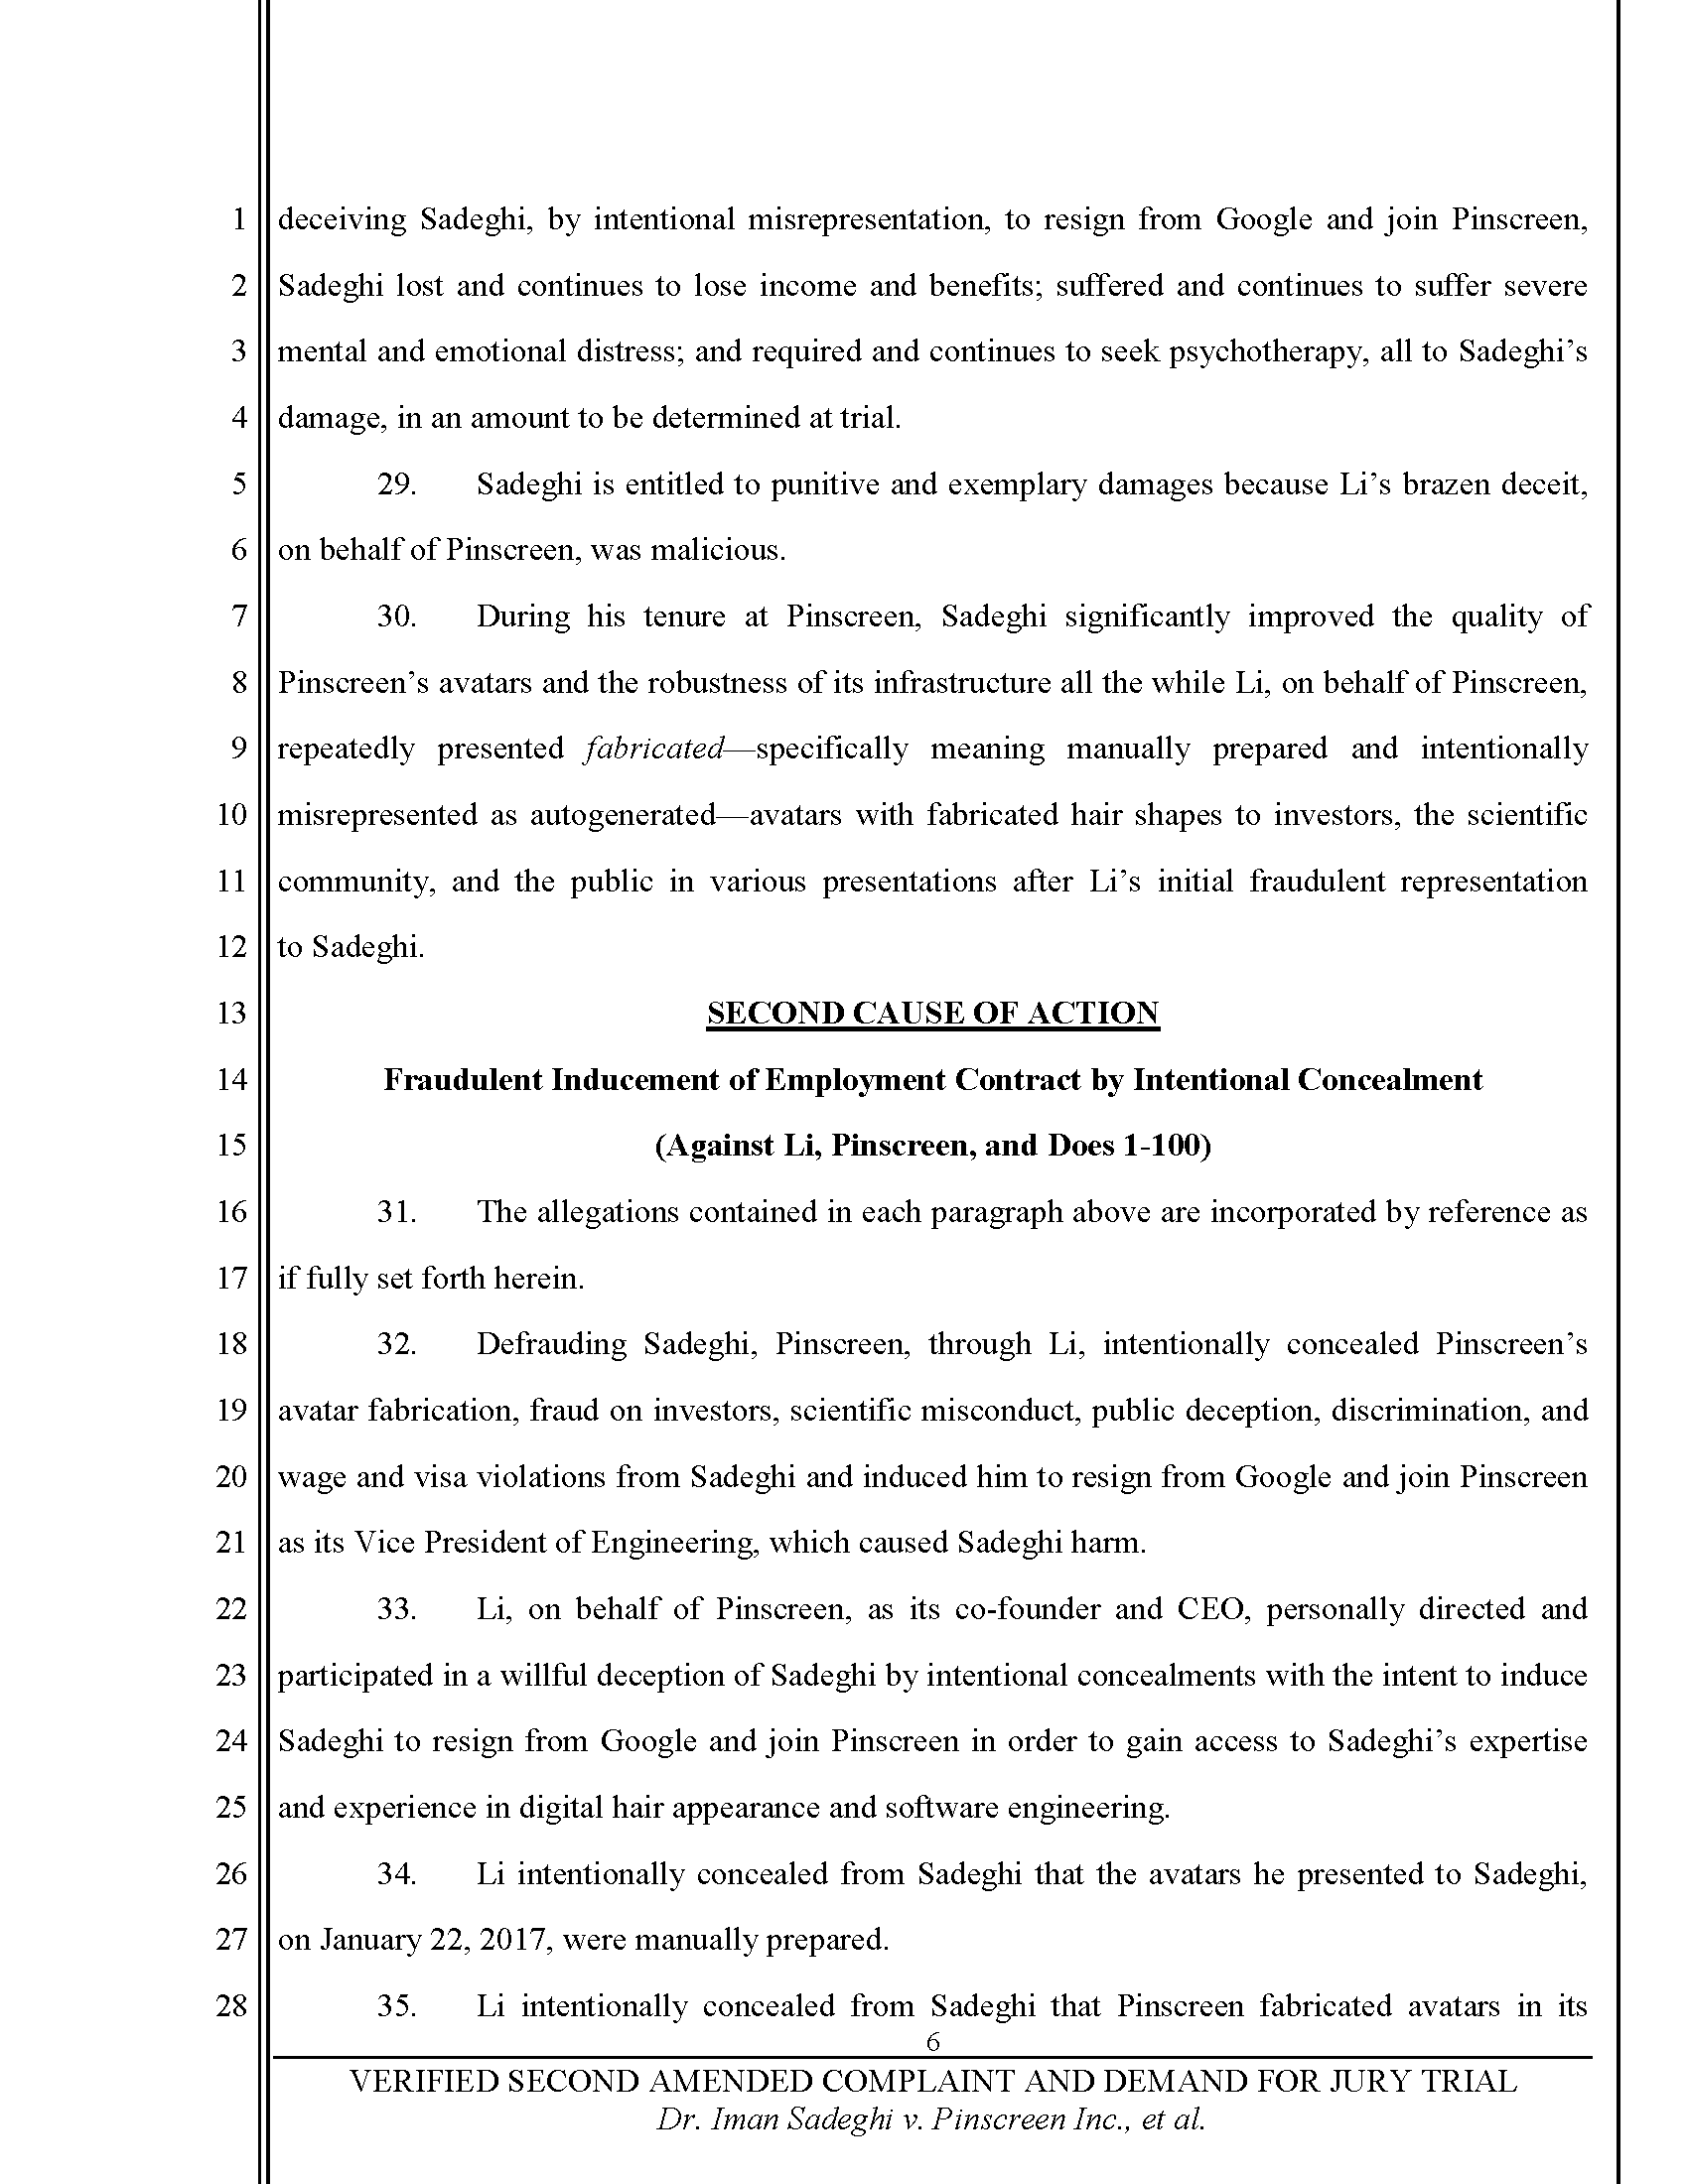 Second Amended Complaint (SAC) Page 7